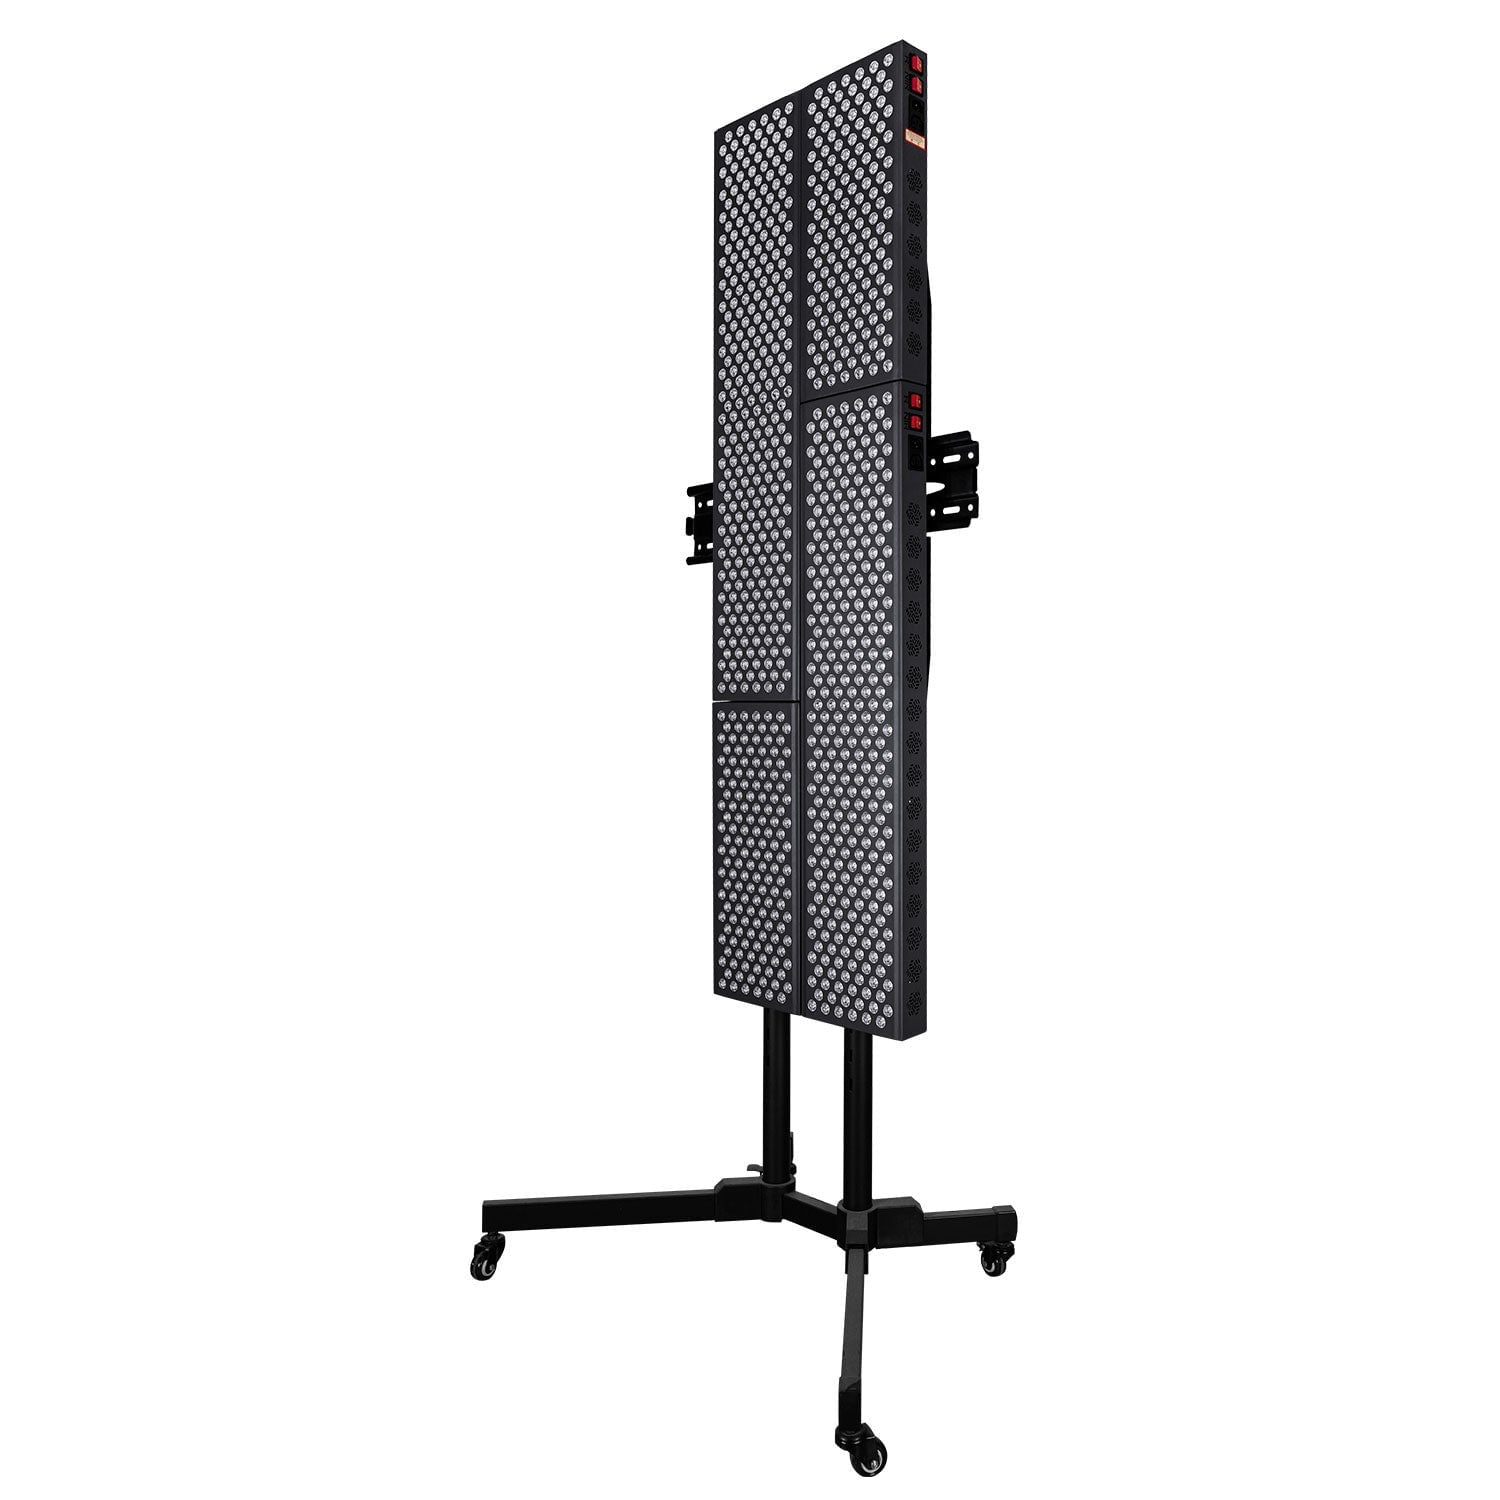 Hooga Full Body Red light Panels with Vertical Stand - 2X HGPRO750 + 2X HGPRO1500